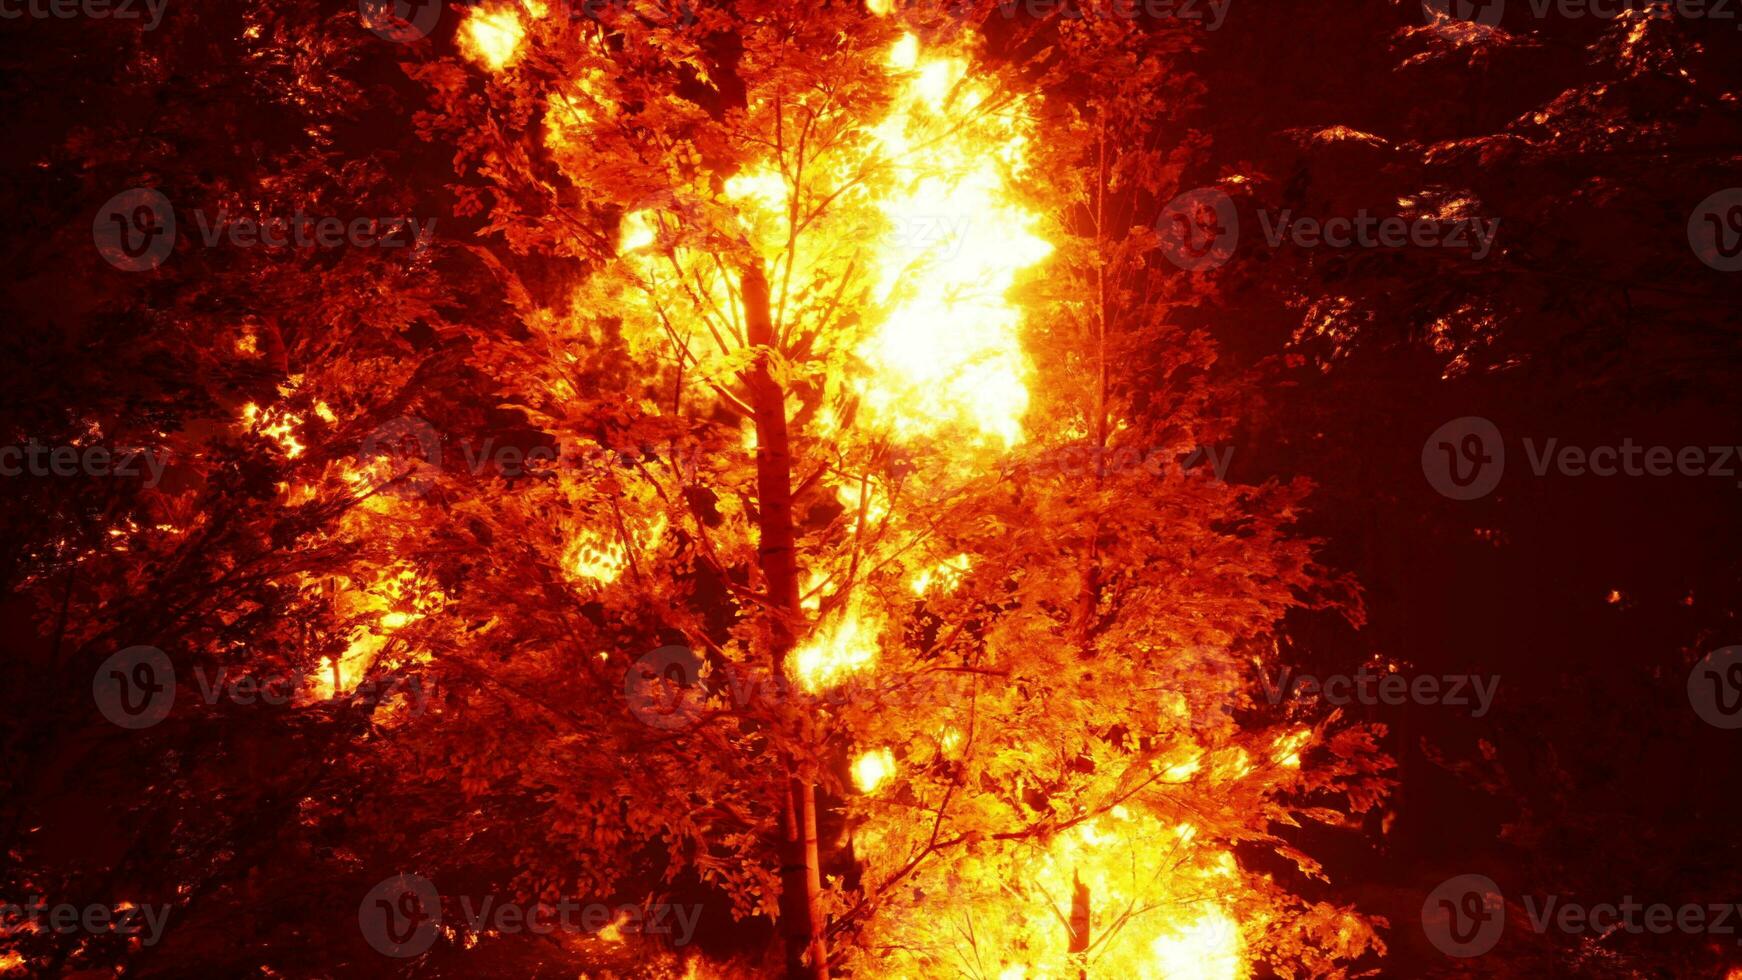 Intense flames from a massive forest fire photo